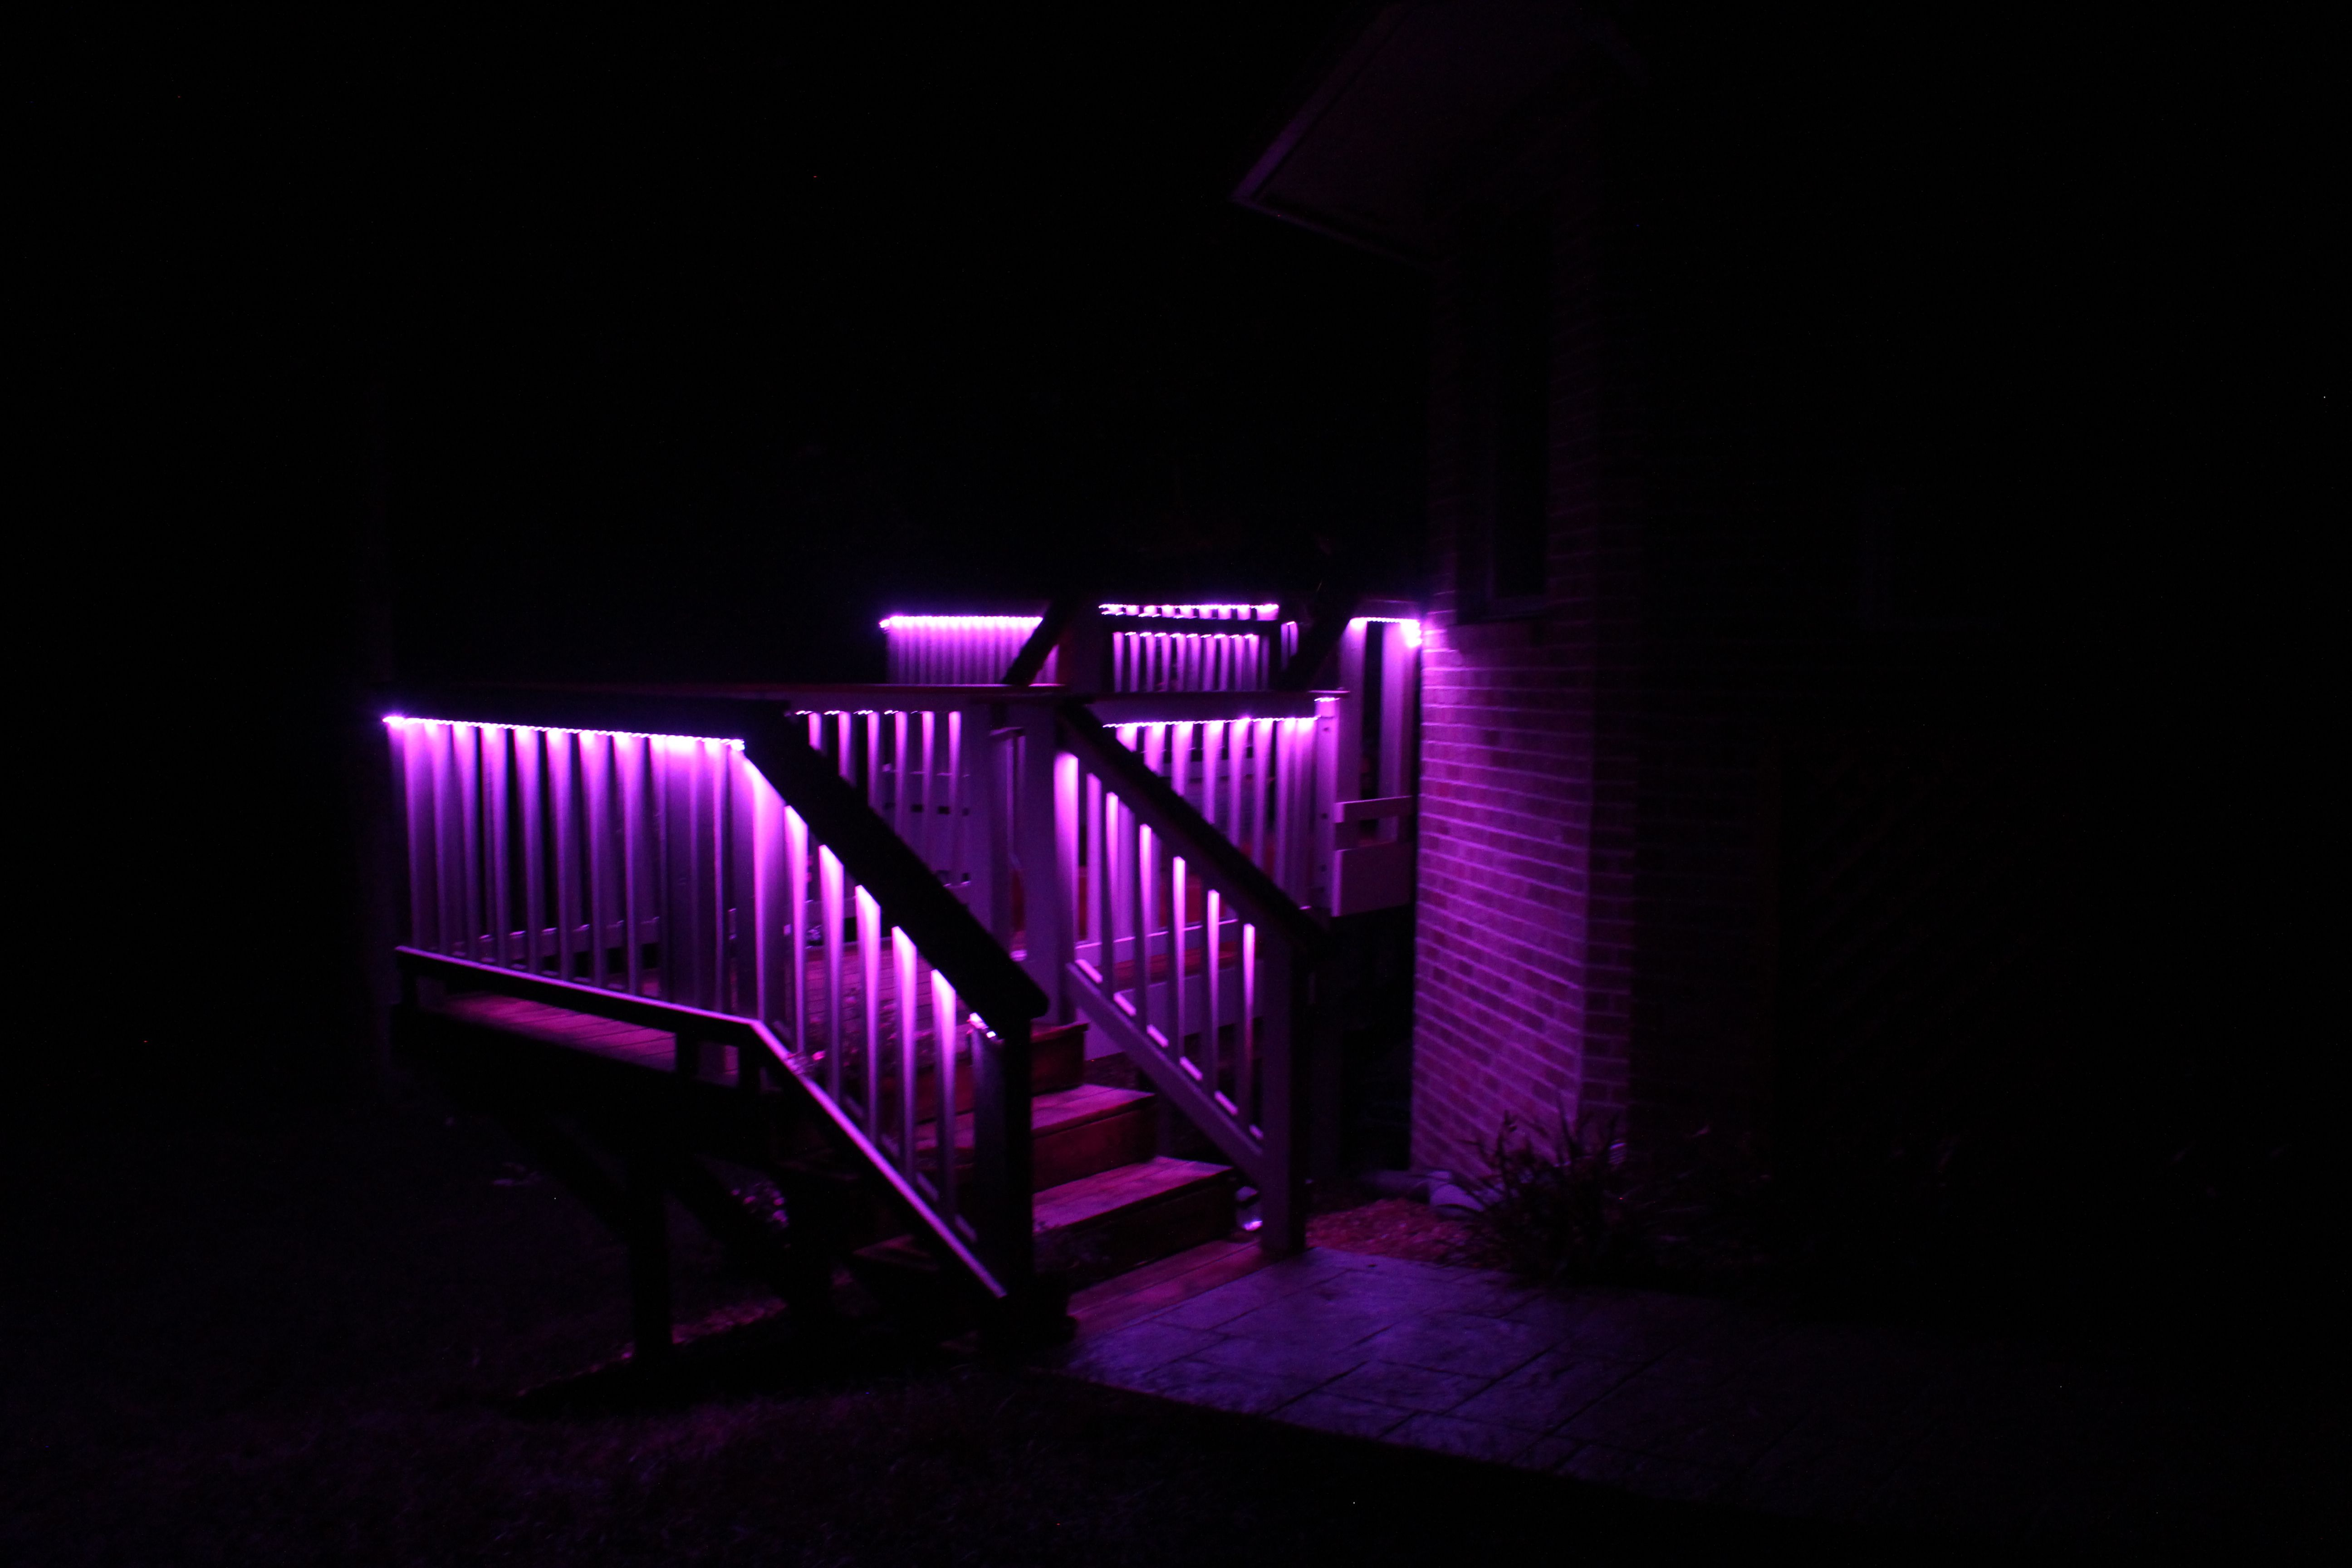 Led Deck Lighting Sundown Has Never Looked So Good Rigid pertaining to dimensions 5184 X 3456